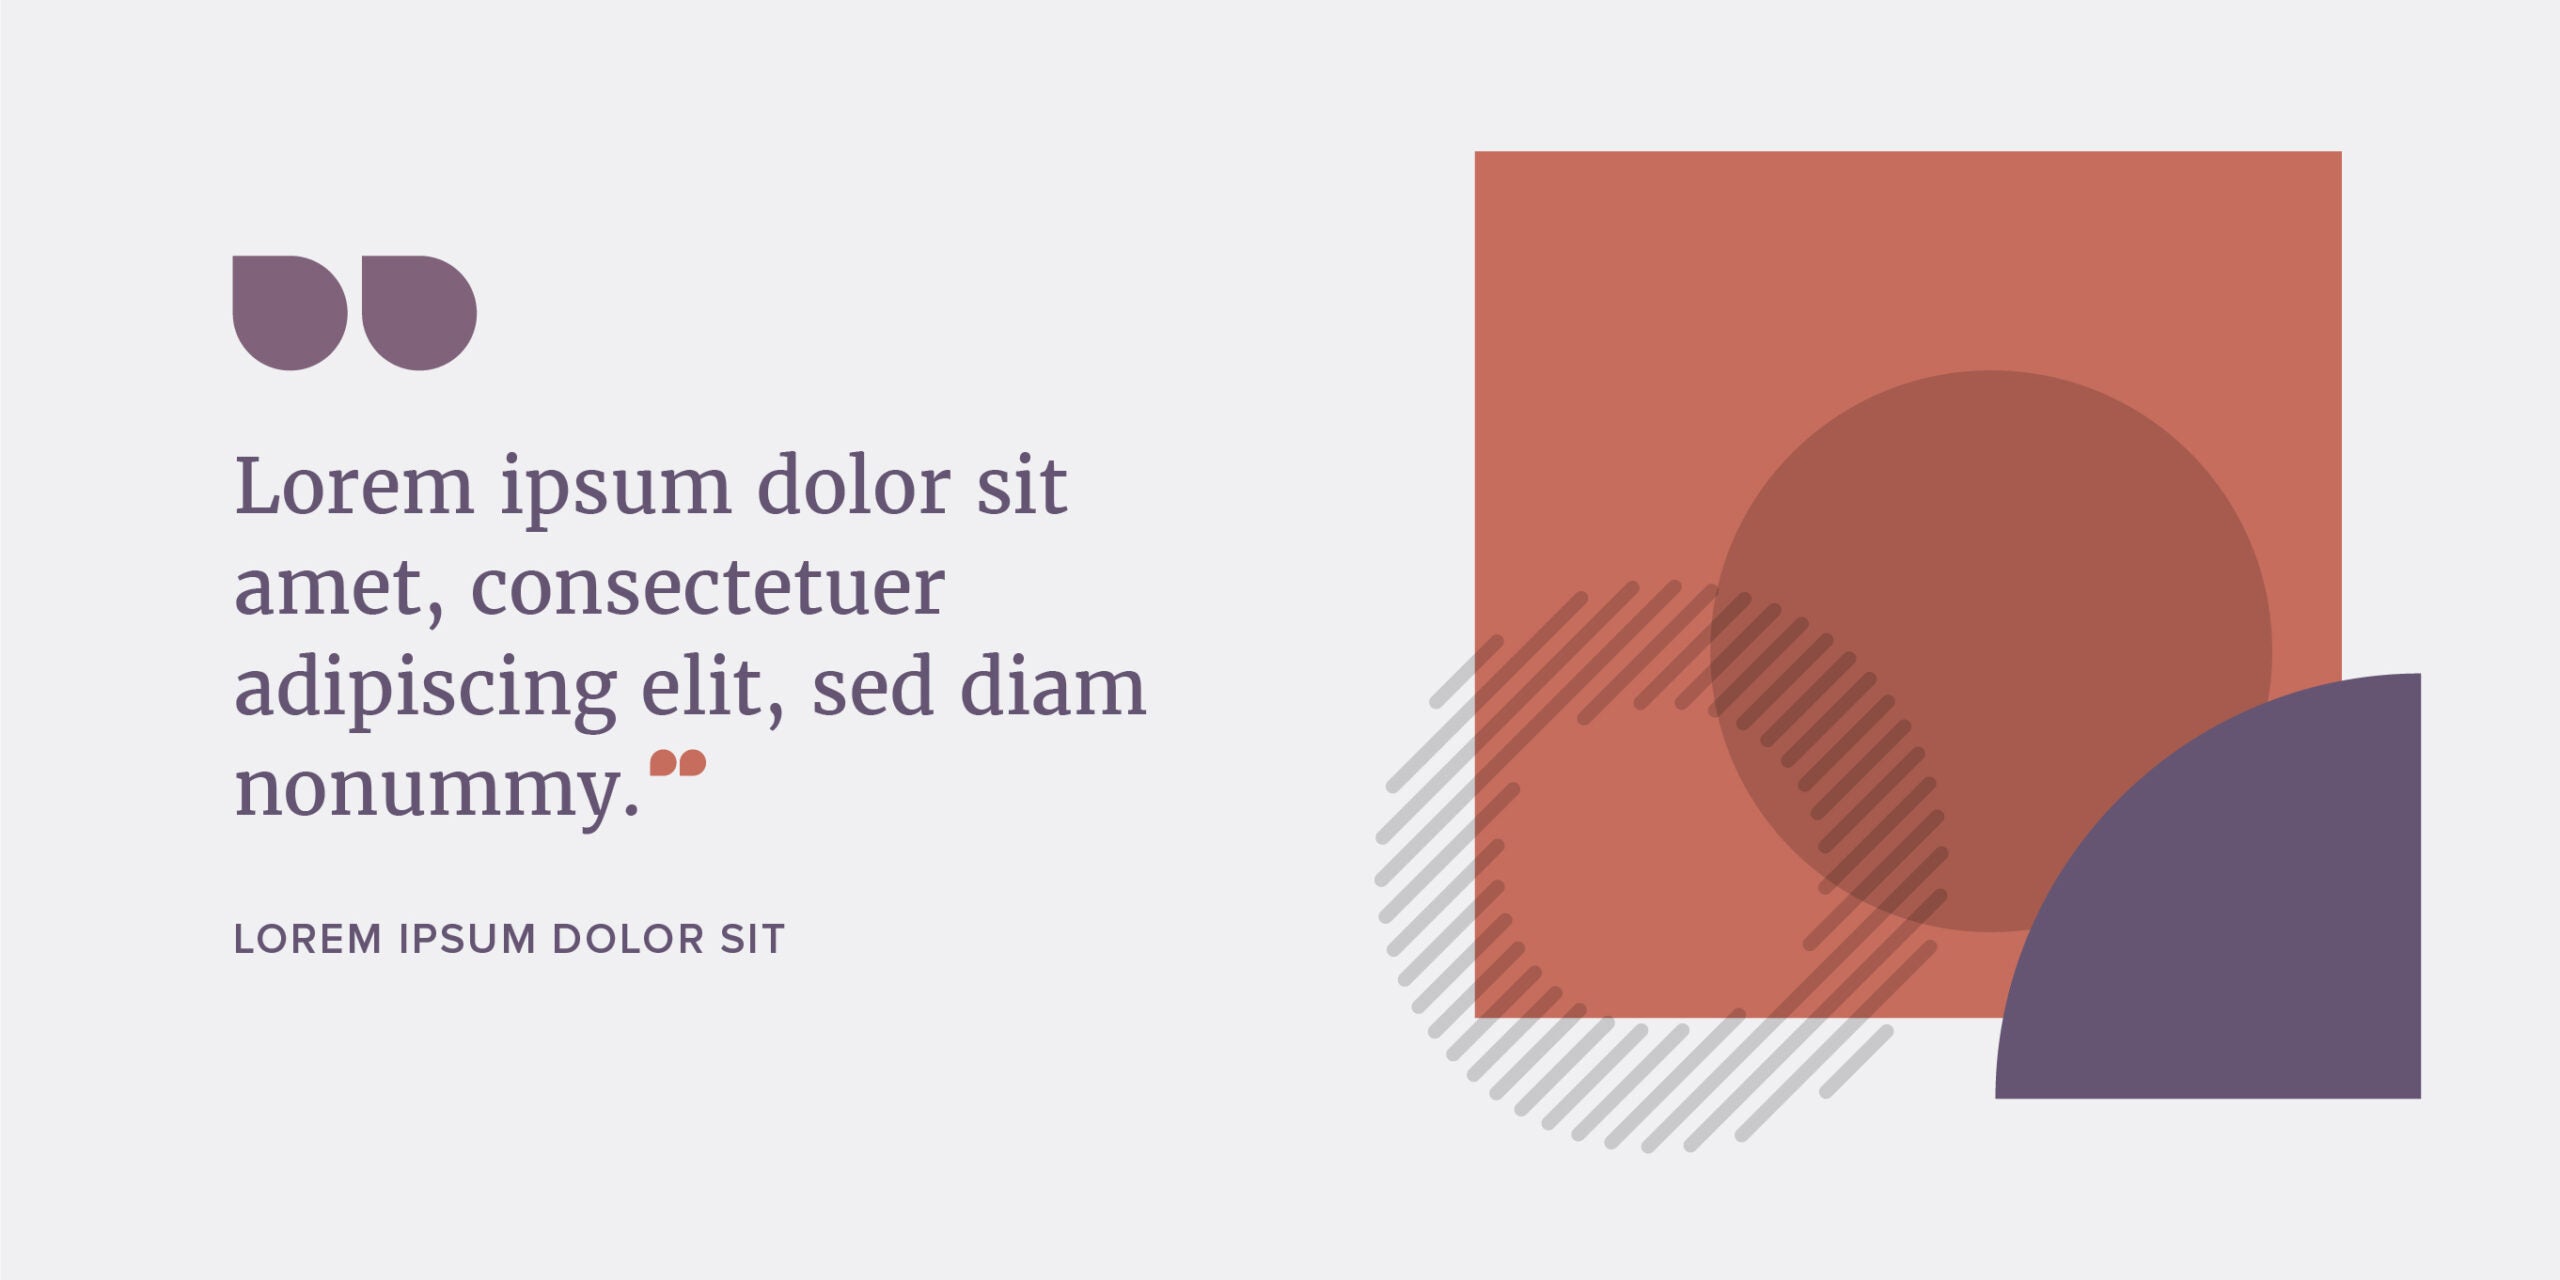 Color Palette Example: Text quote in purple with an orange rectangle, purple quarter-circle, grey circle and grey "o" shape on a larger horizontal grey shape.